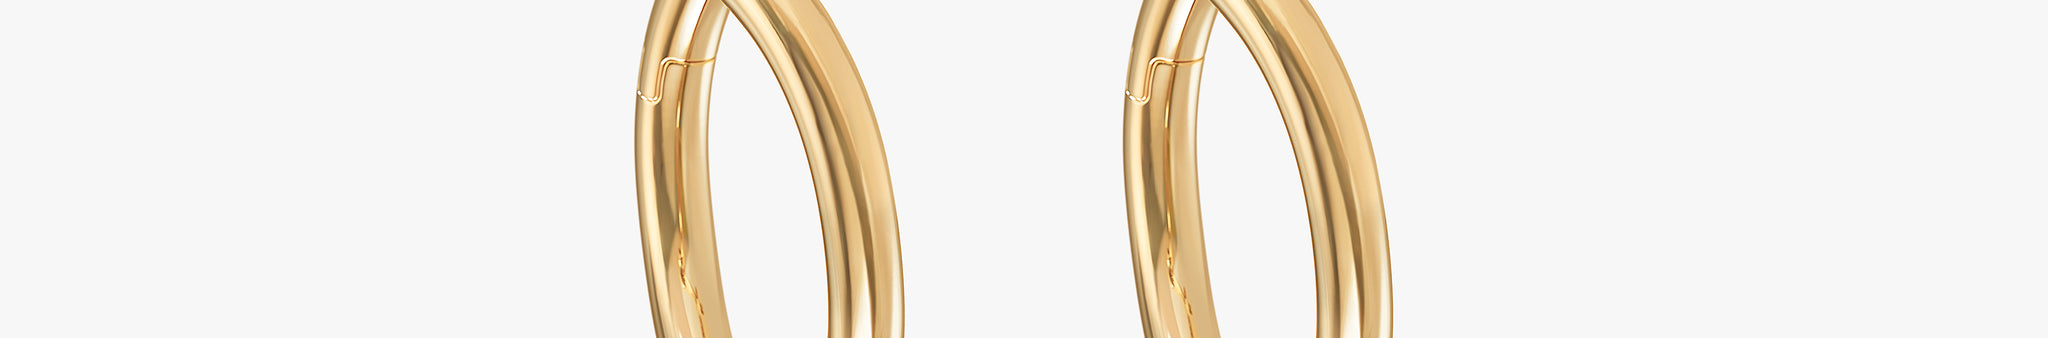 J'EVAR 14KT Yellow Gold Enso ALTR Lab Grown Diamond Earrings Perspective View